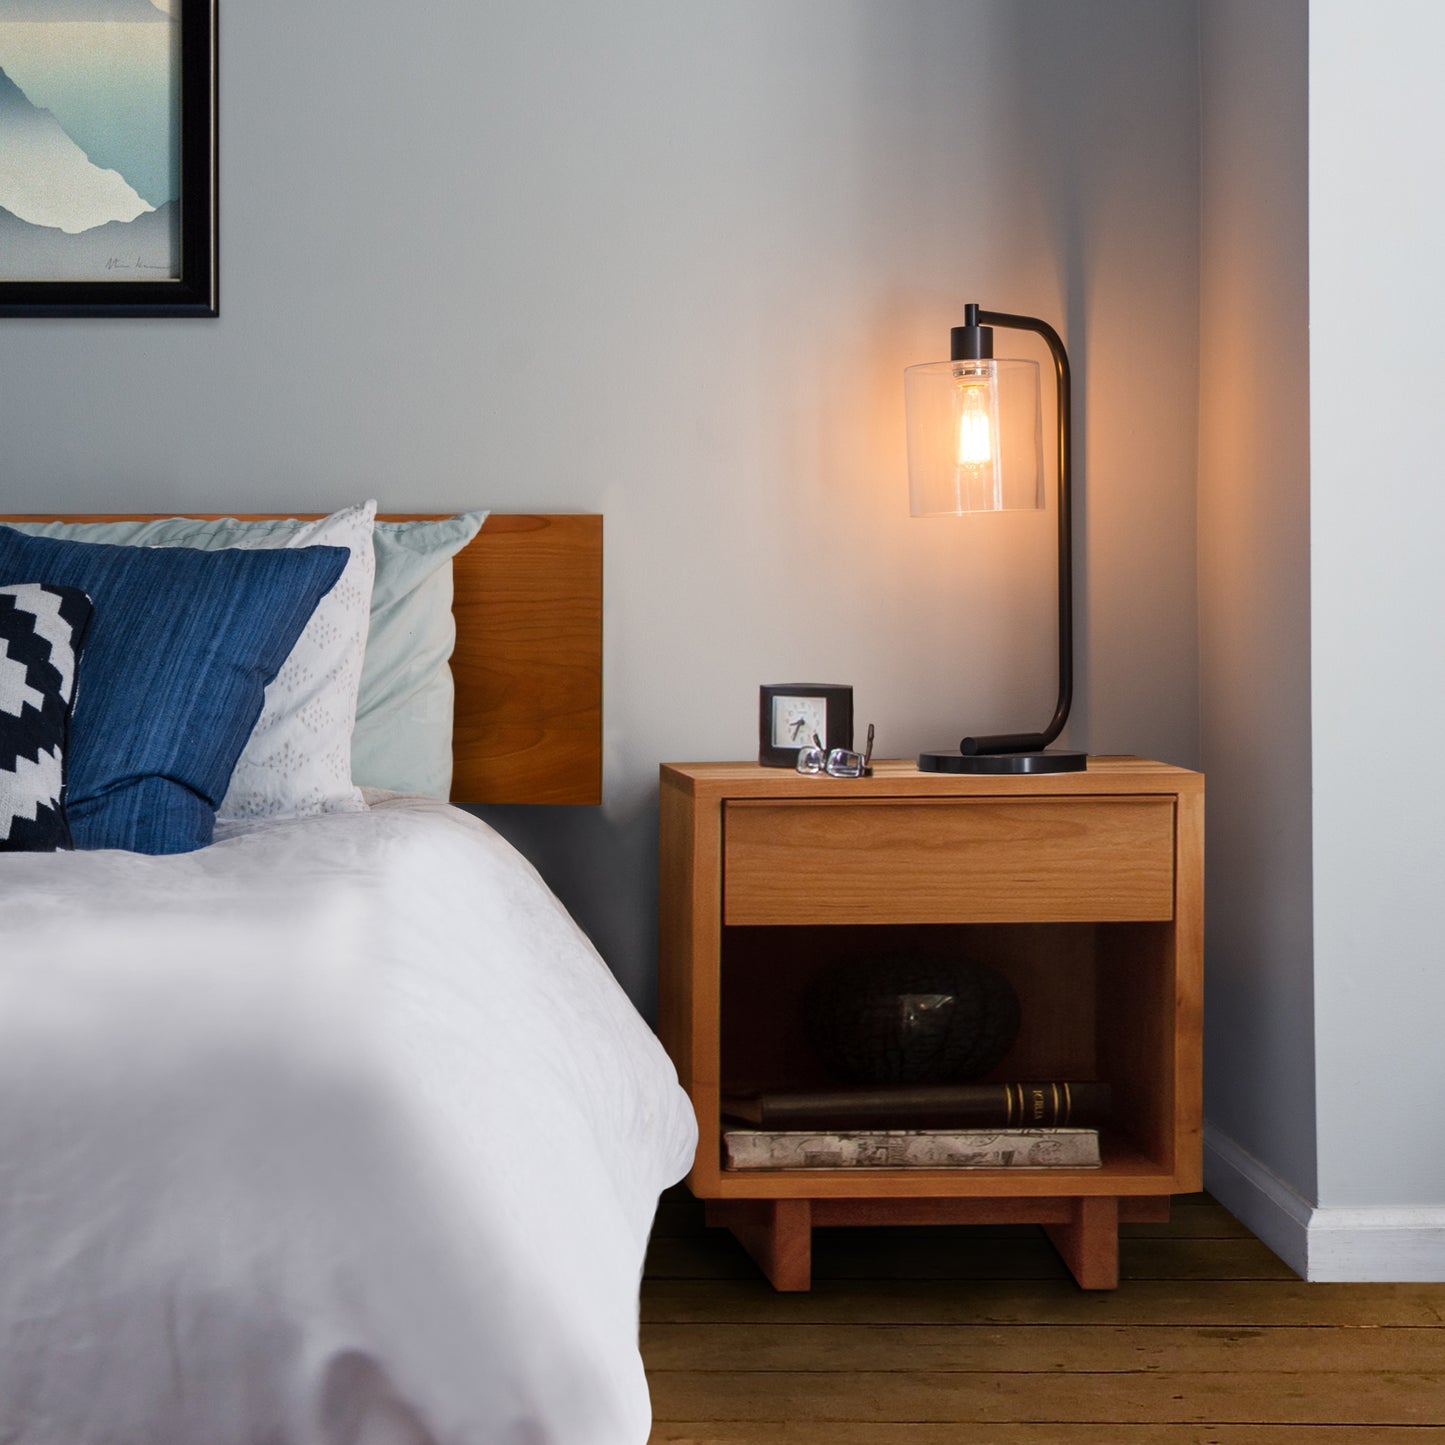 A cozy bedroom corner featuring a Vermont Furniture Designs Kipling 1-Drawer Enclosed Shelf Nightstand with a lamp, photo frame, and decorative items, next to a bed with blue and white bedding.